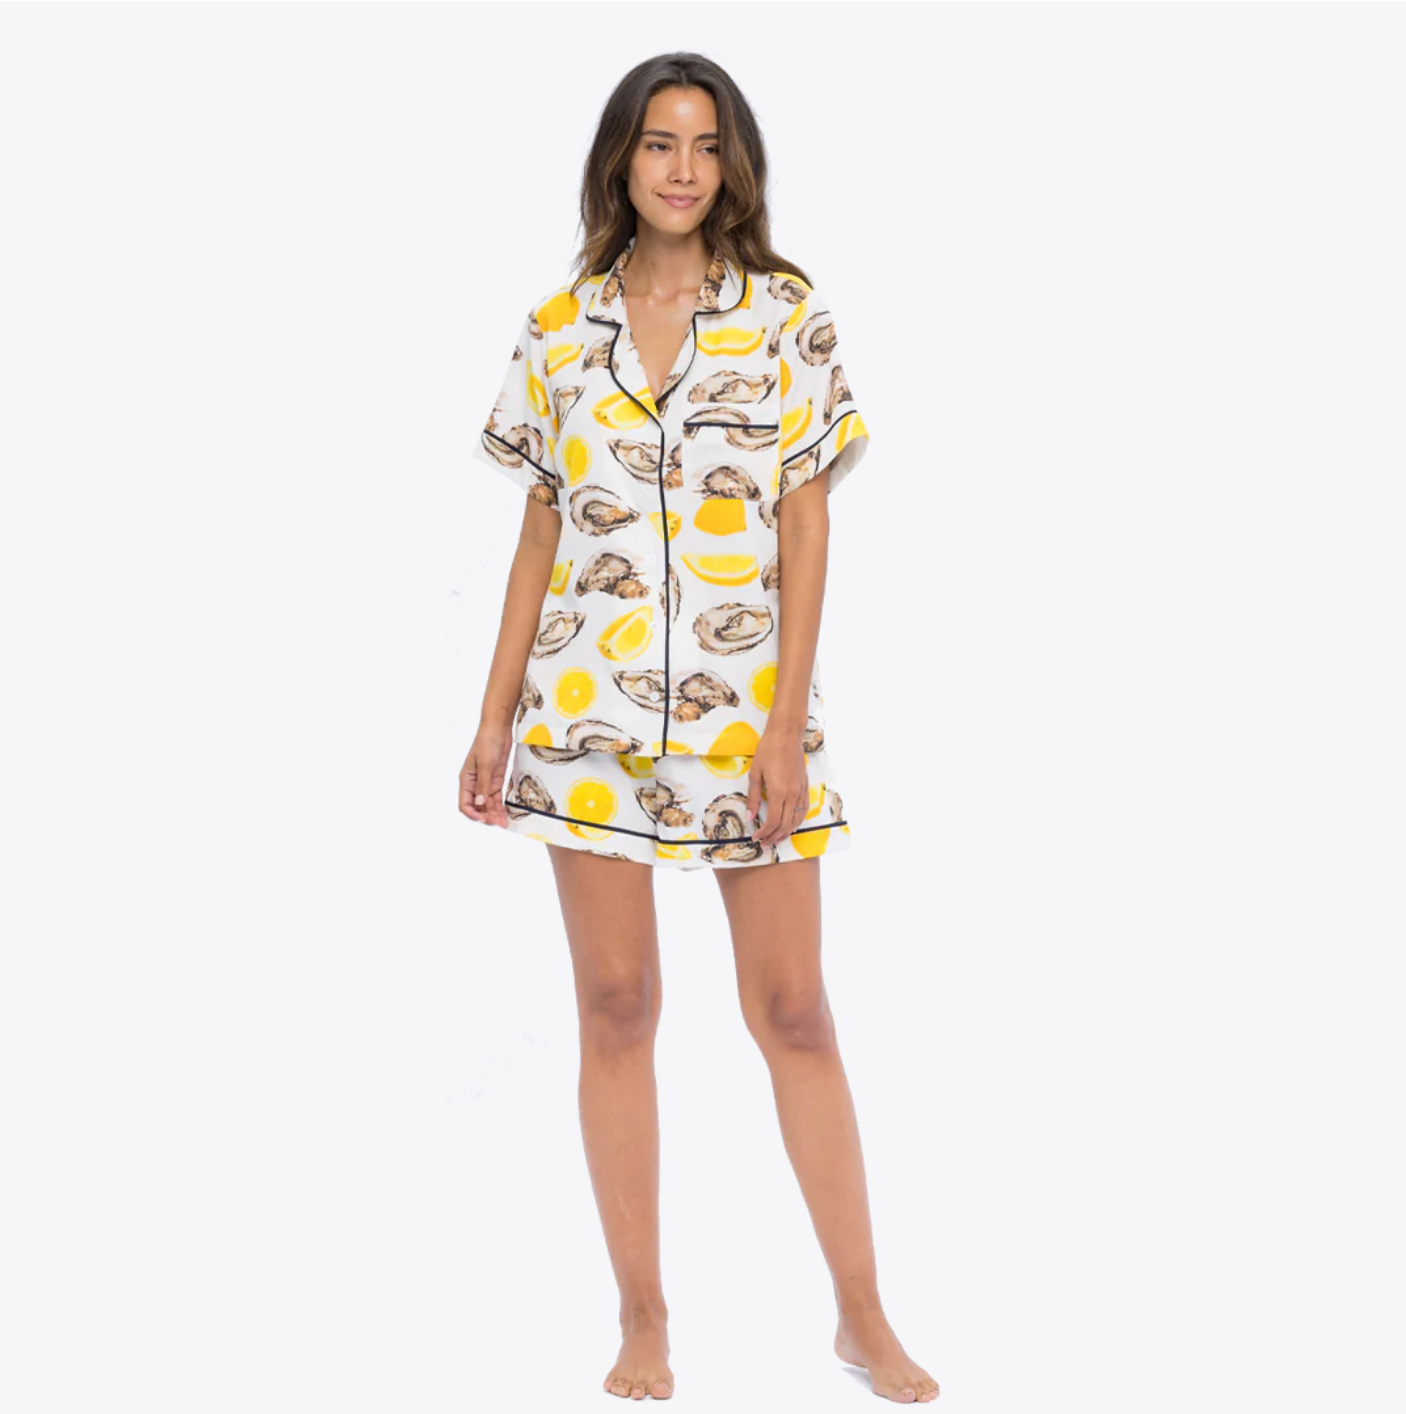 The World is Your Oyster Pajama Shorts Set - Katie Kime